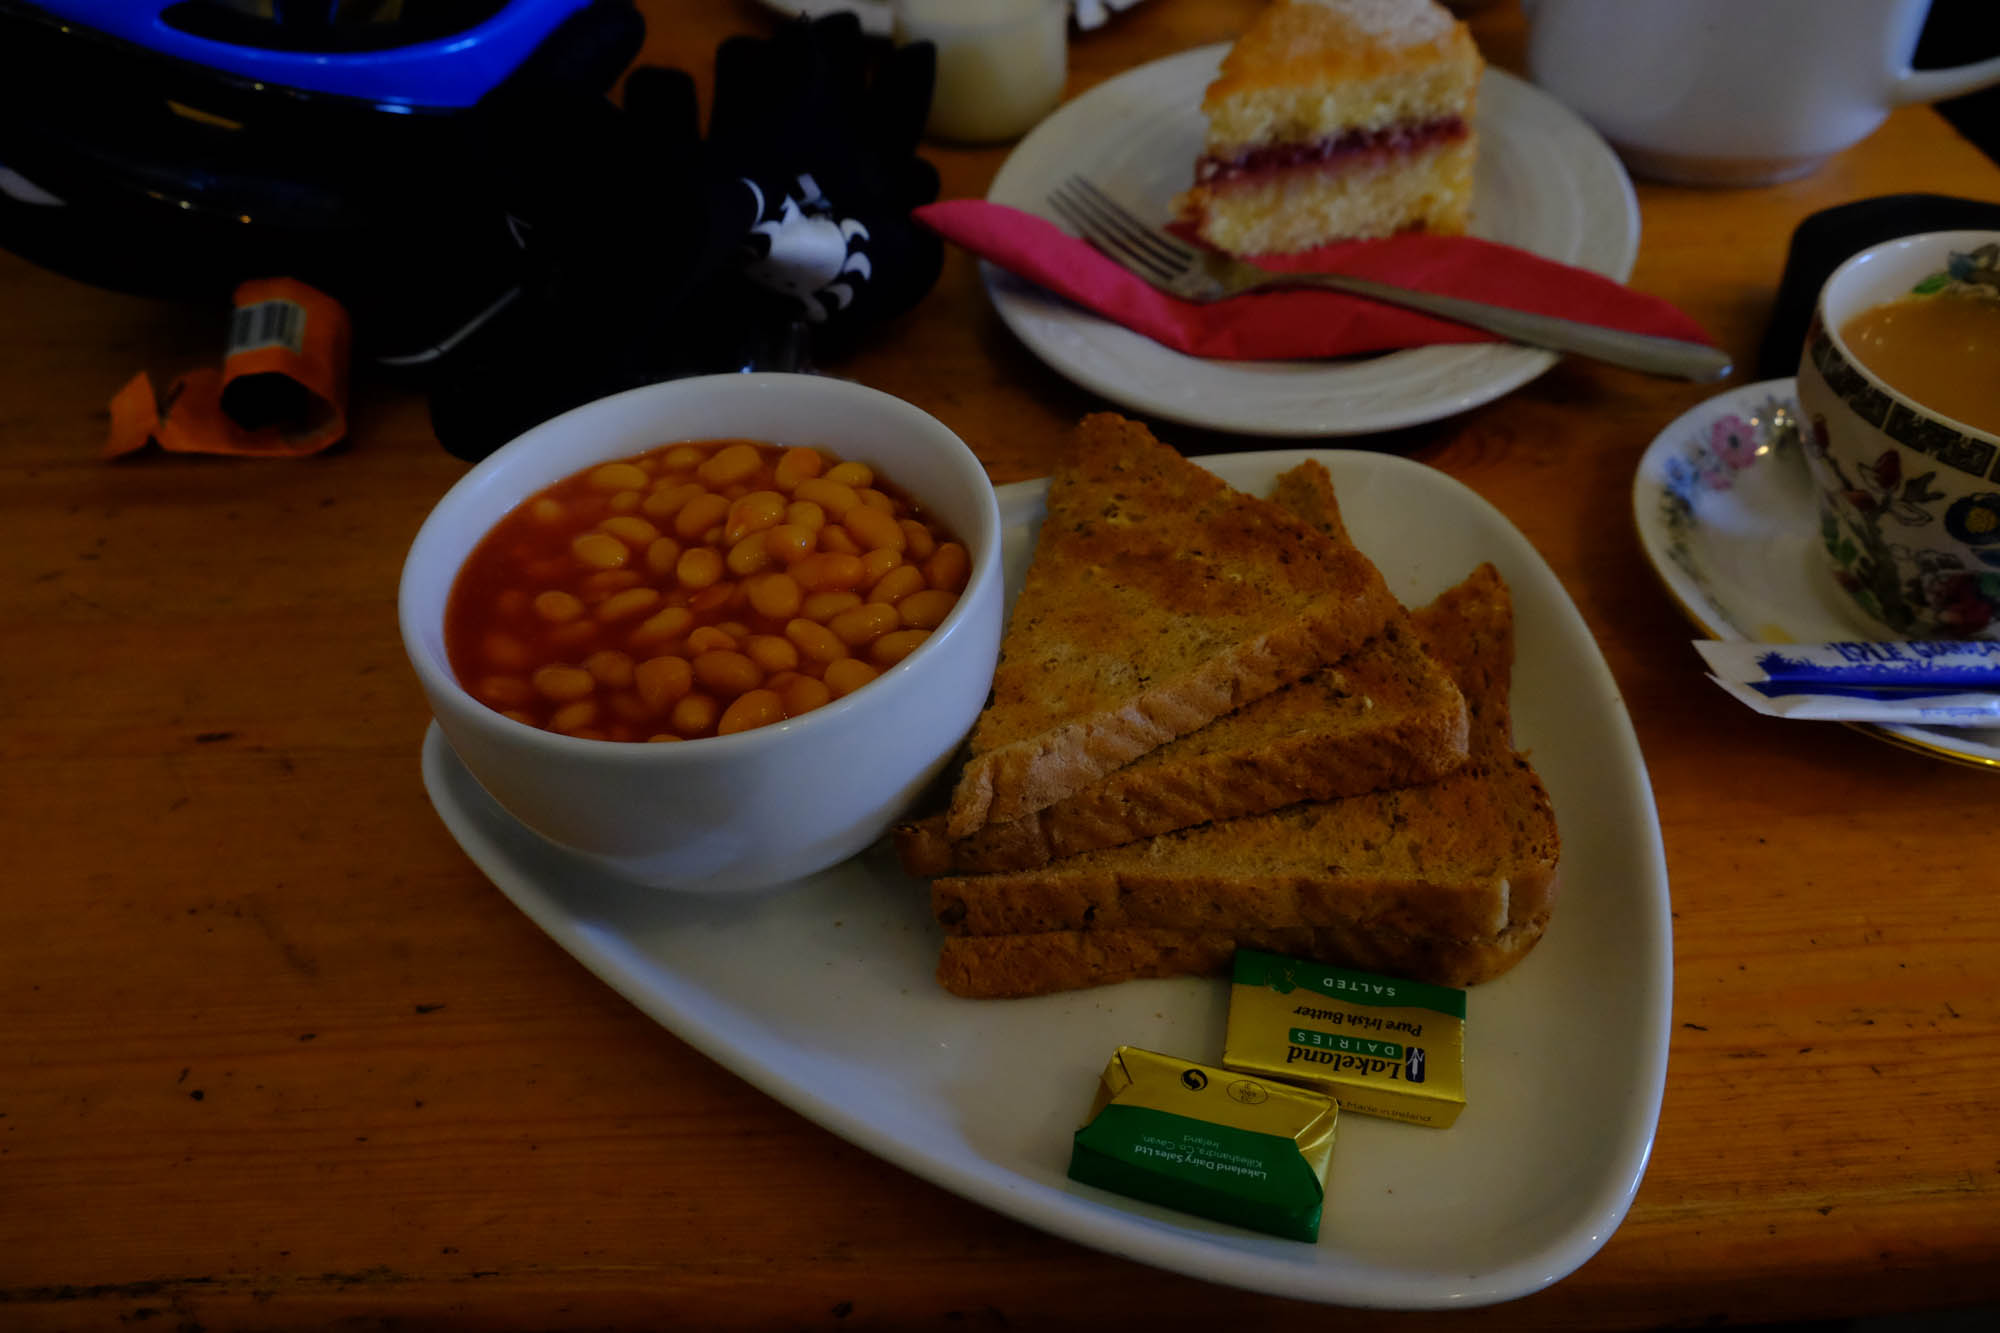 Beans WITH toast I say. How very posh.